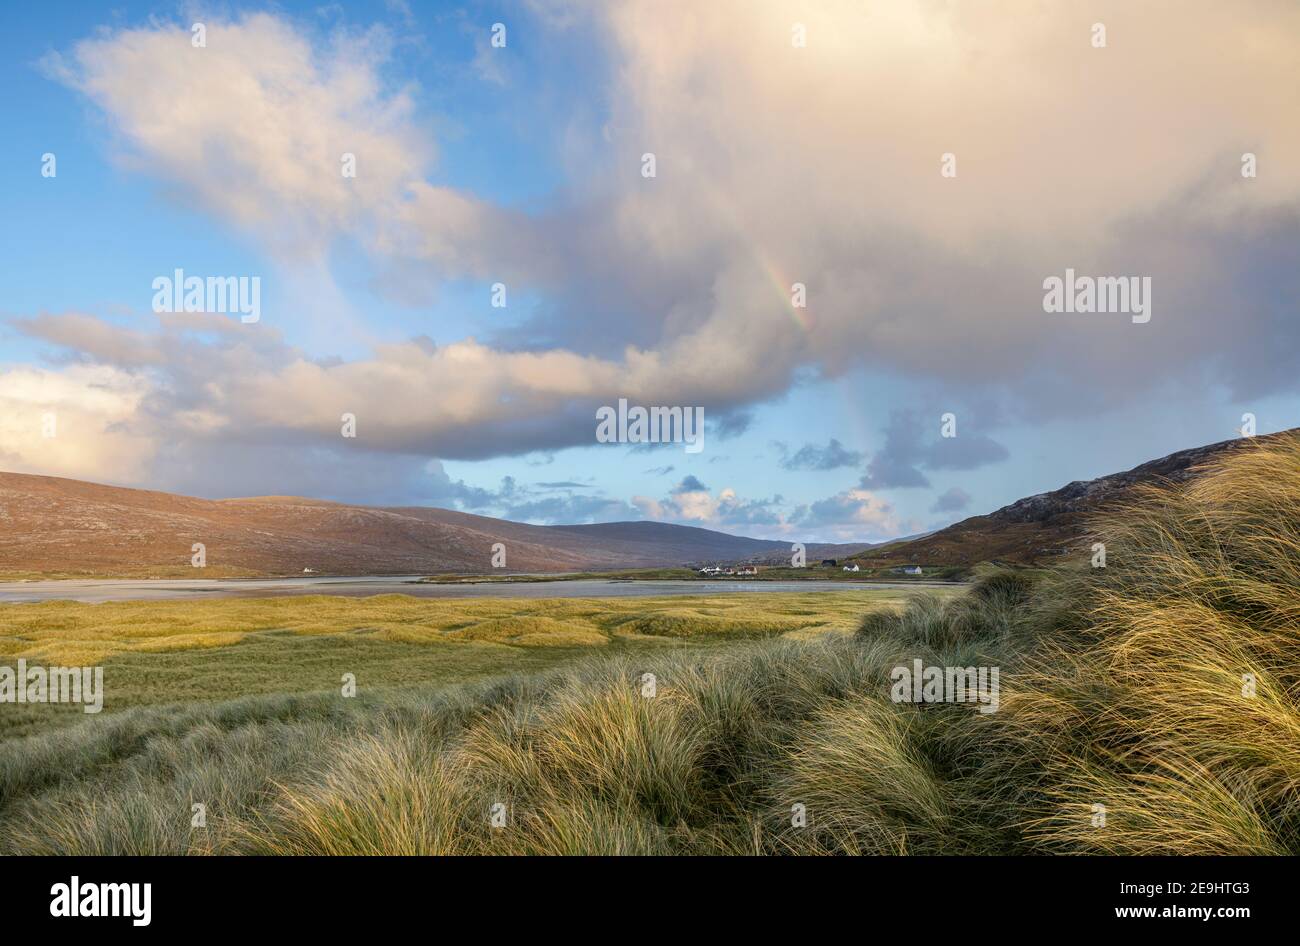 Isle of Lewis and Harris, Scotland: Clearing storm clouds and rainbow over the dune grasses near Luskentyre beach on South Harris Island Stock Photo